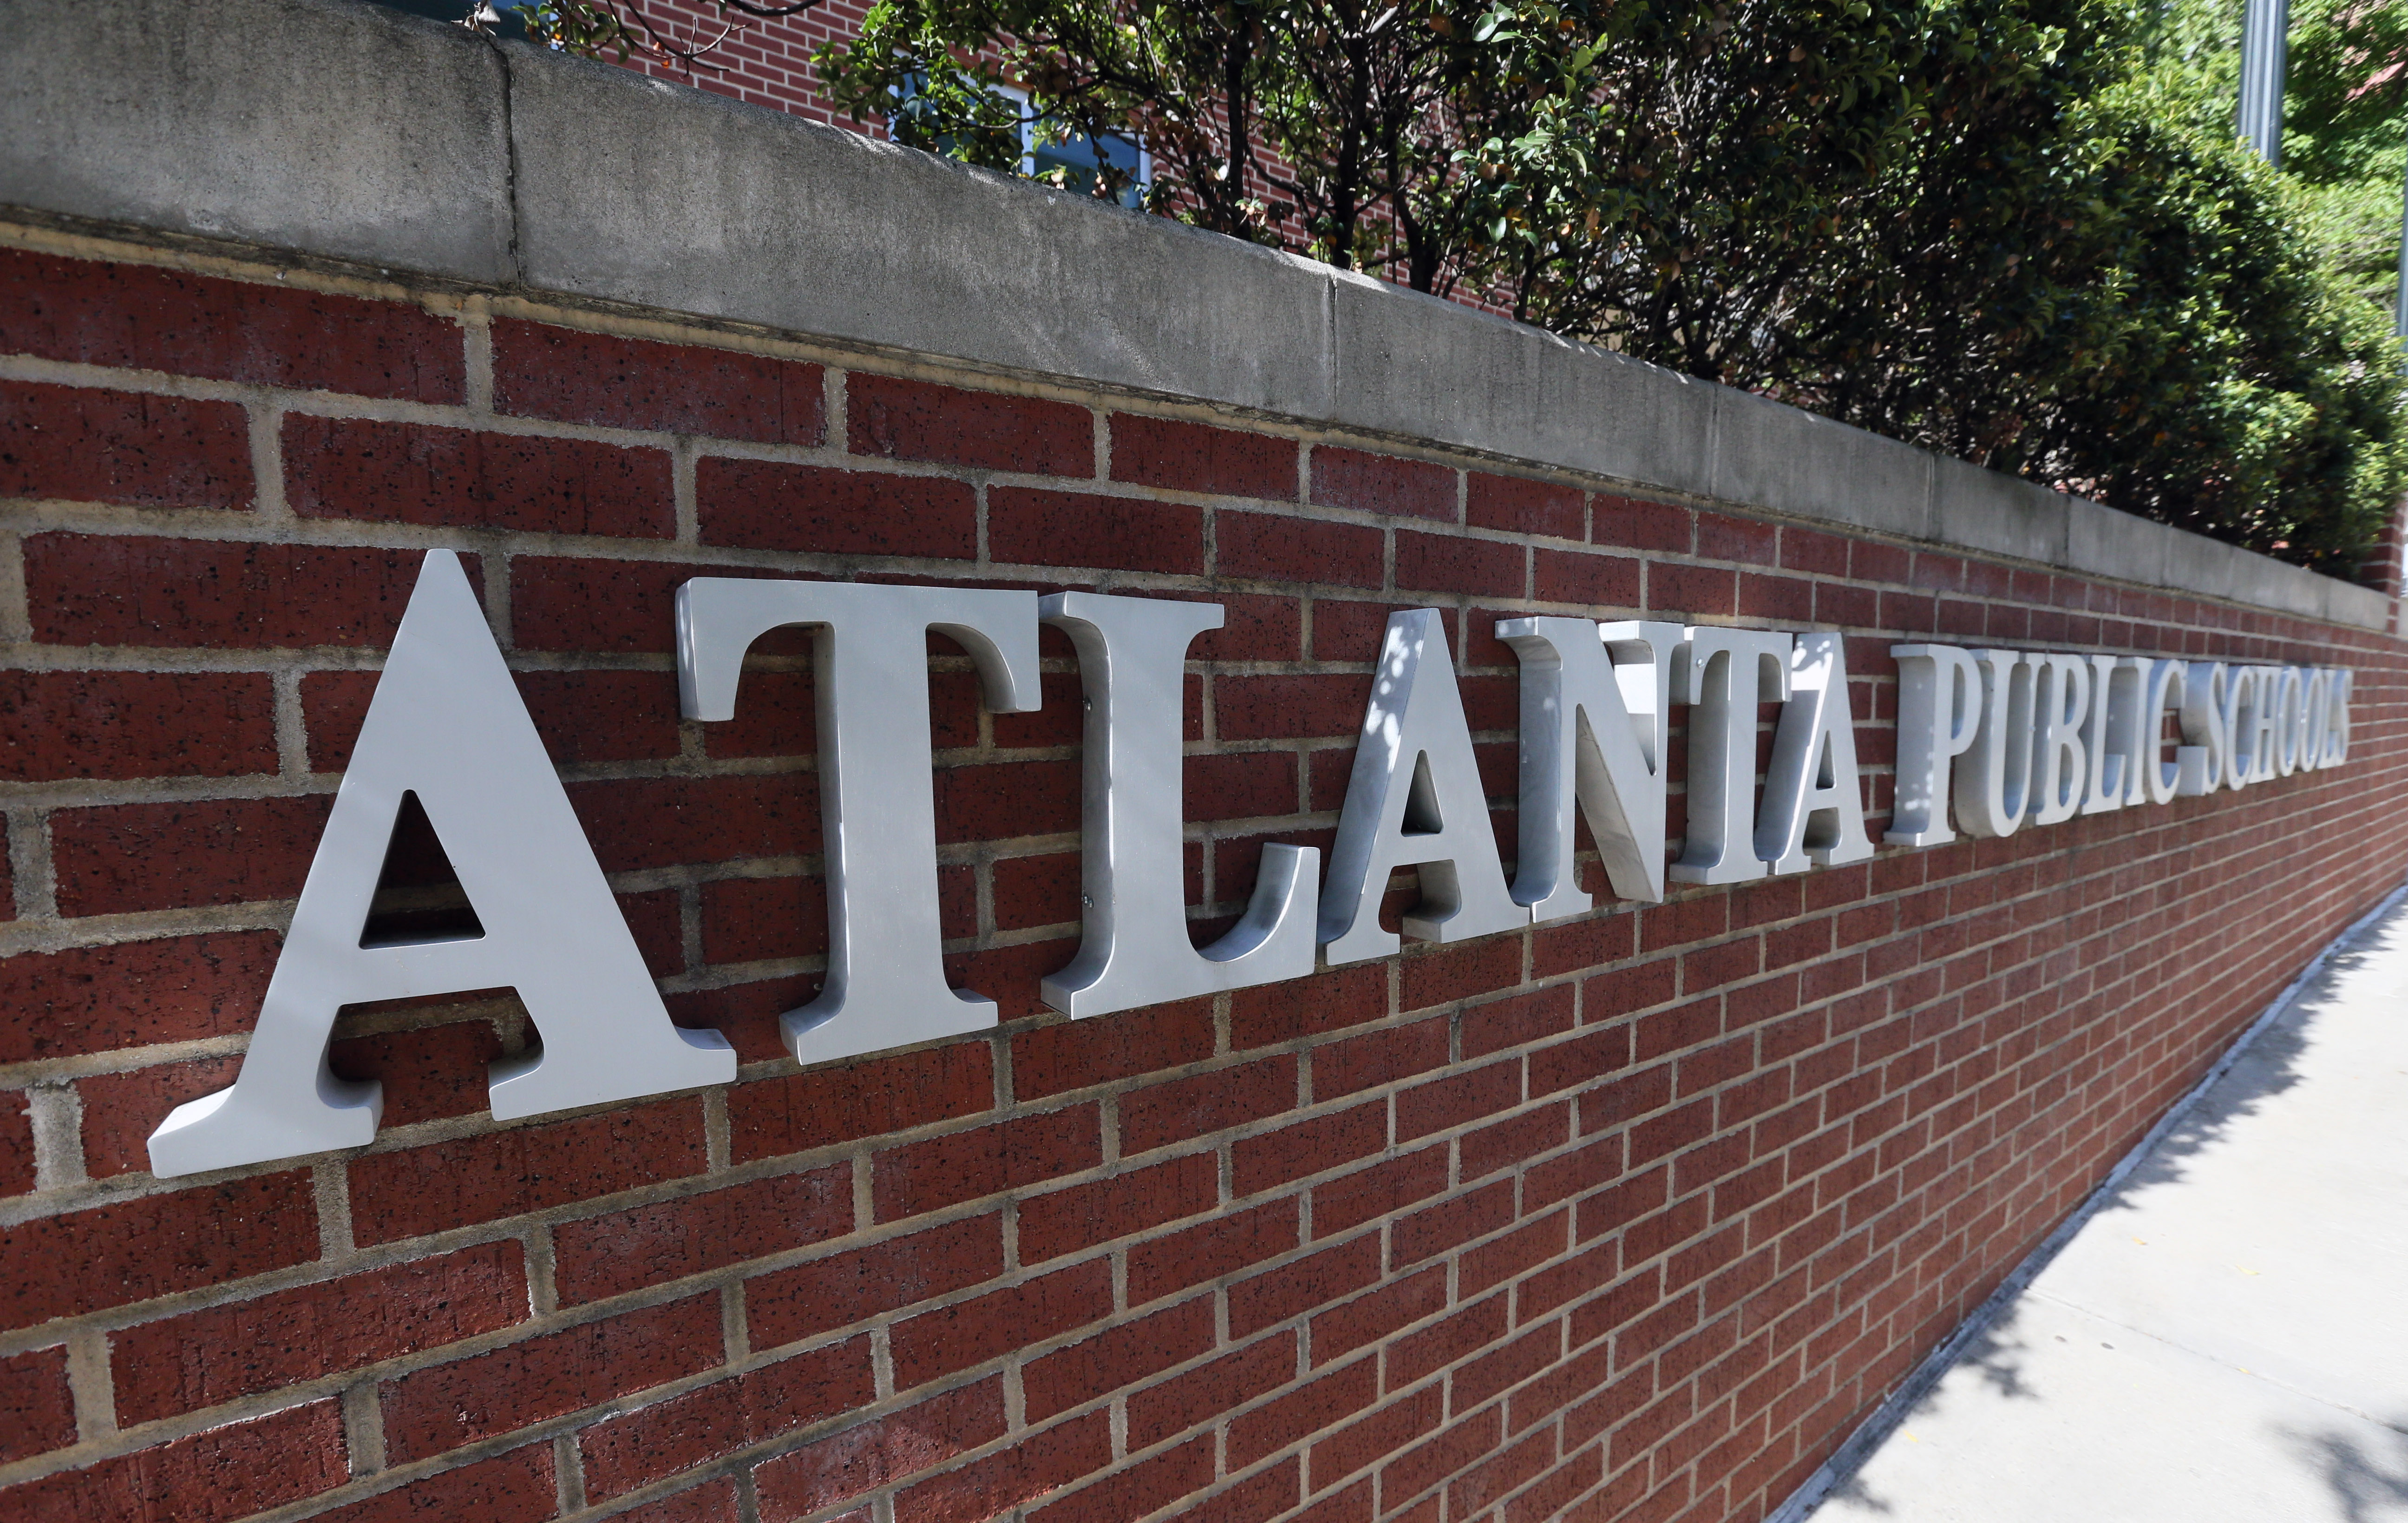 Atlanta schools implement new weapons detection systems